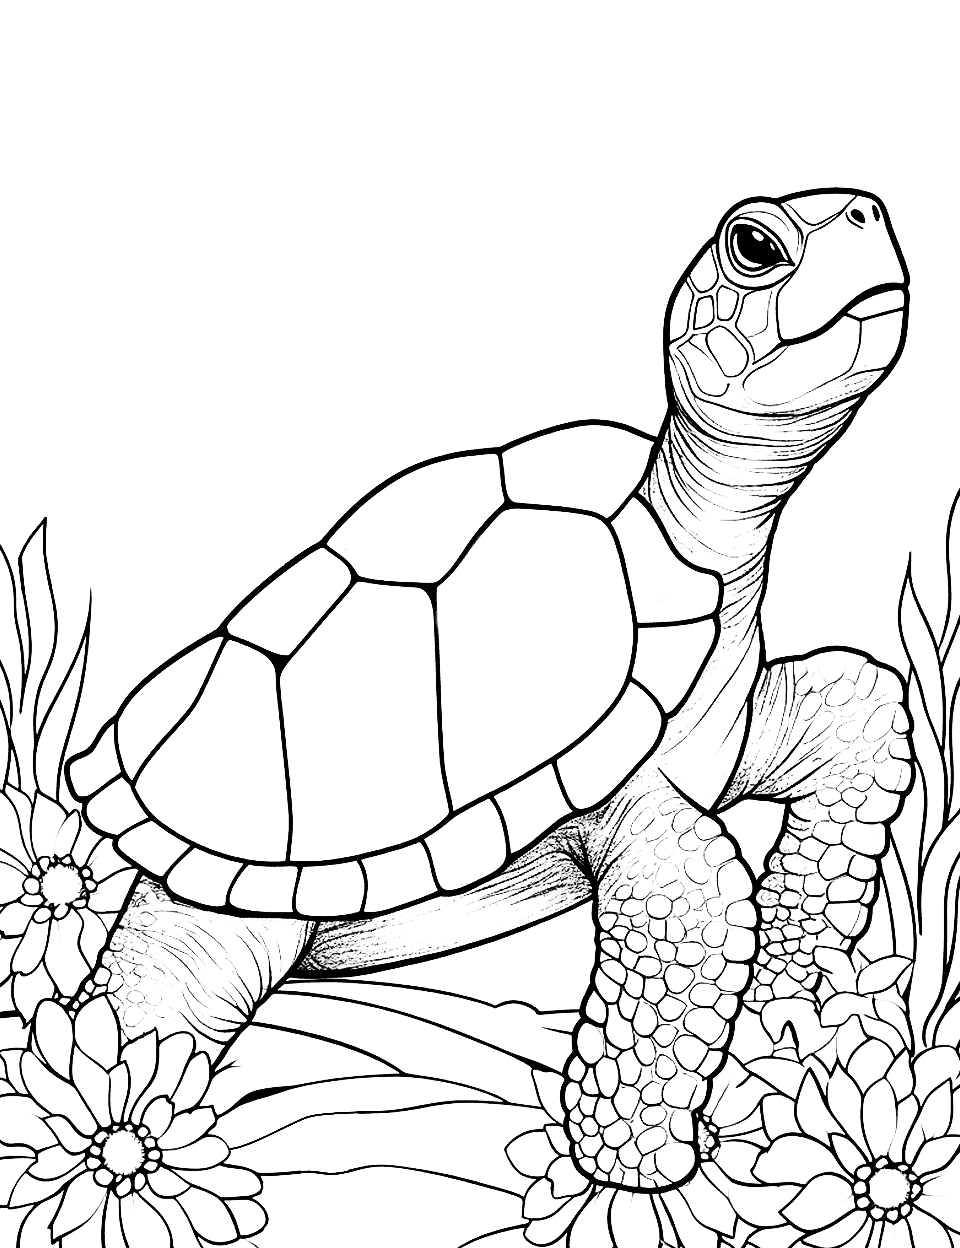 Turtle's Spring Day Turtle Coloring Page - A turtle enjoying the fresh blossoms of spring, surrounded by flowers.